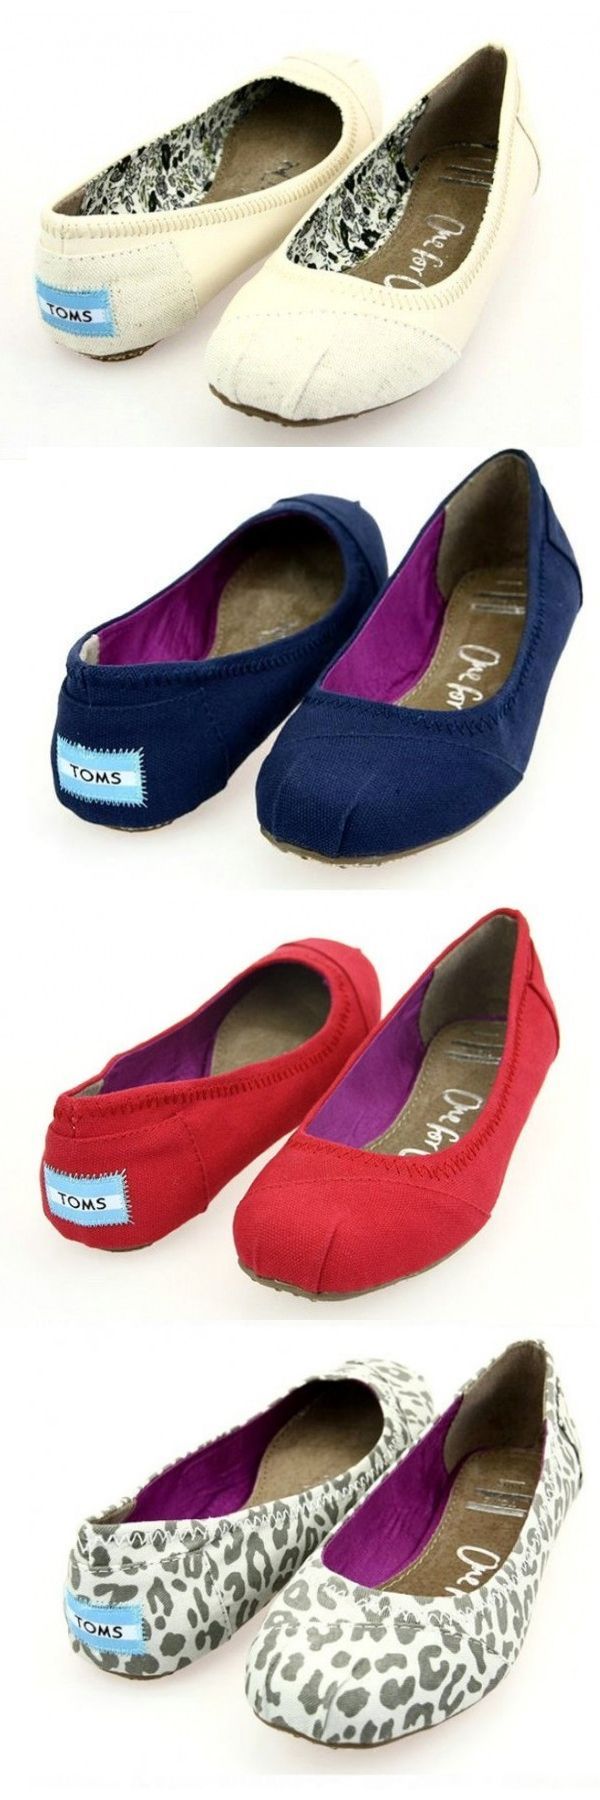 $19 toms flats they are so cute